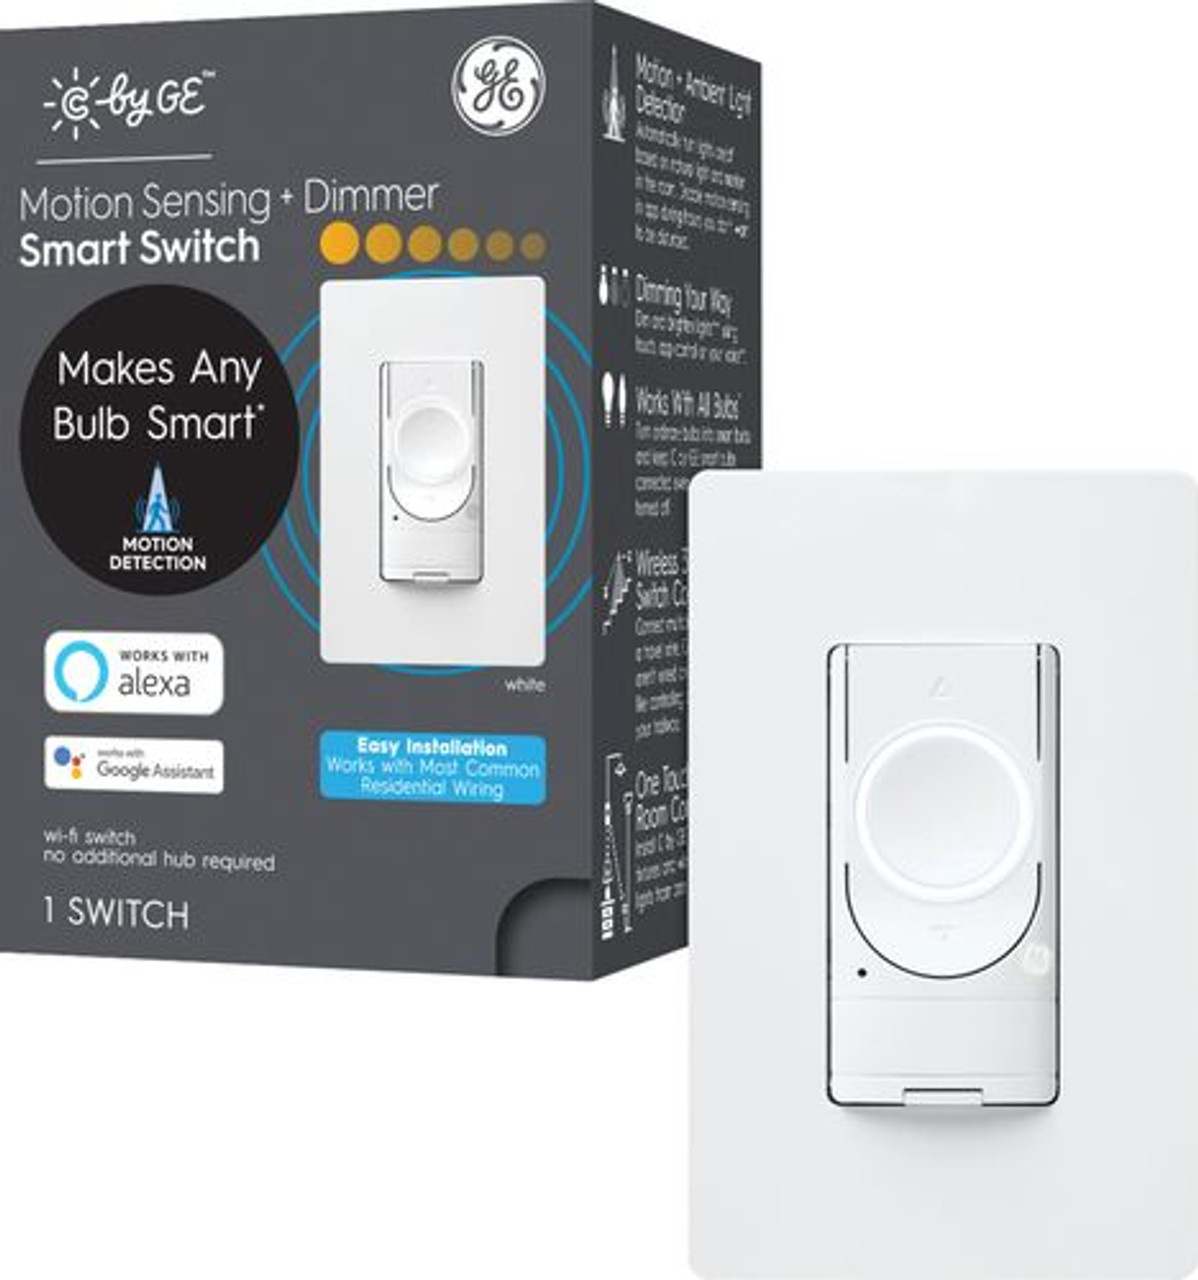 C by GE - 3-Wire Smart Switch Motion Sensing and Dimmer - White